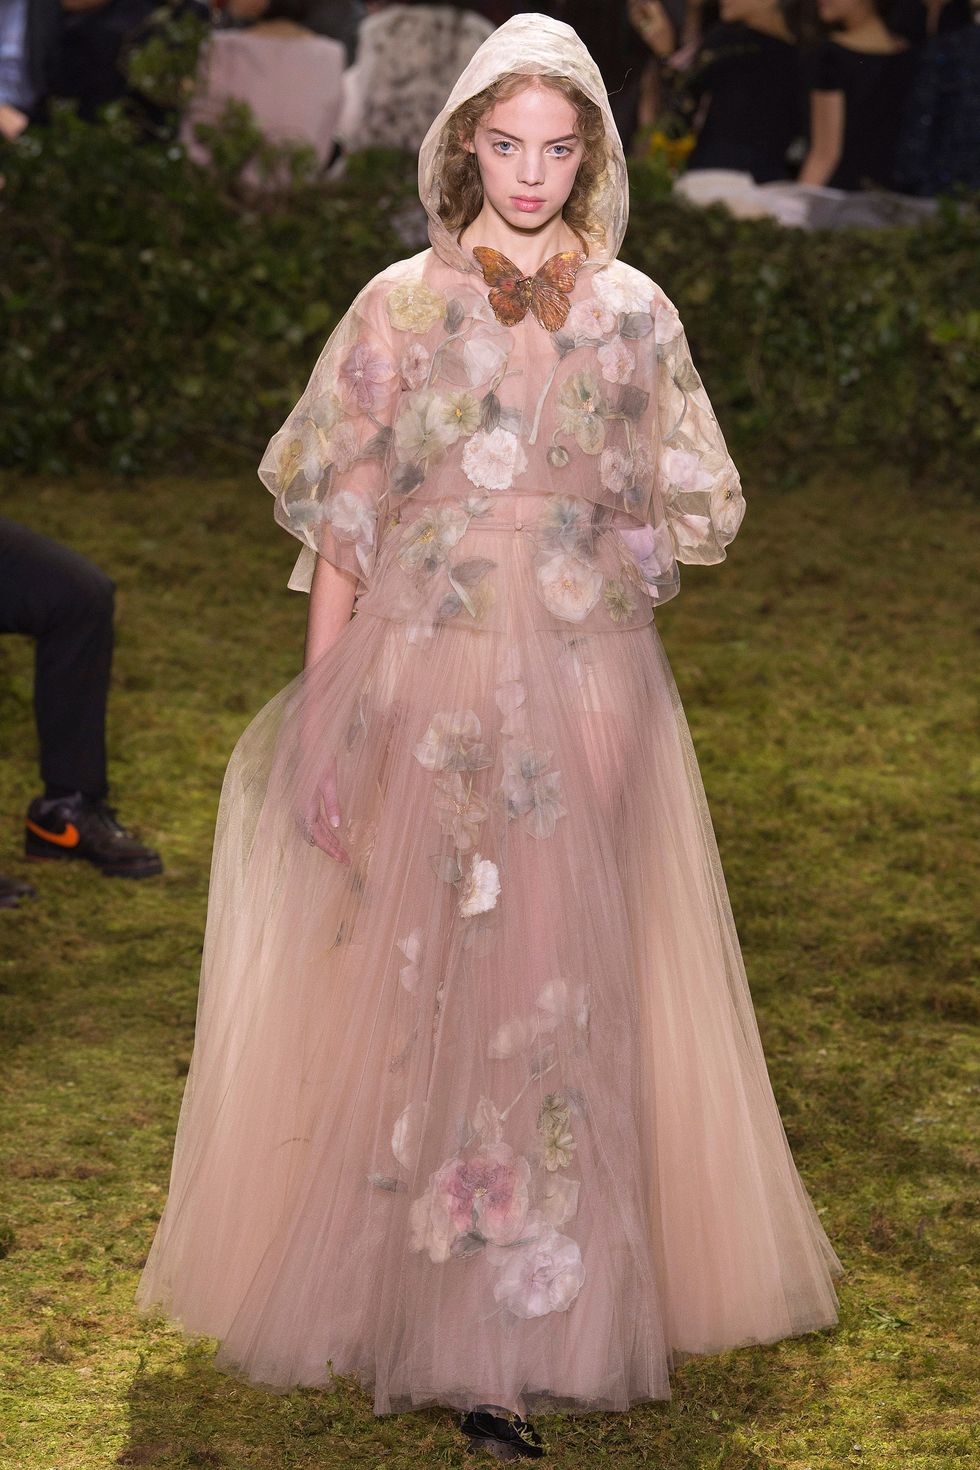 Inside the Blooming Mind of a Floral Fashion Icon - christian dior - soft pink floral dress - on thursd